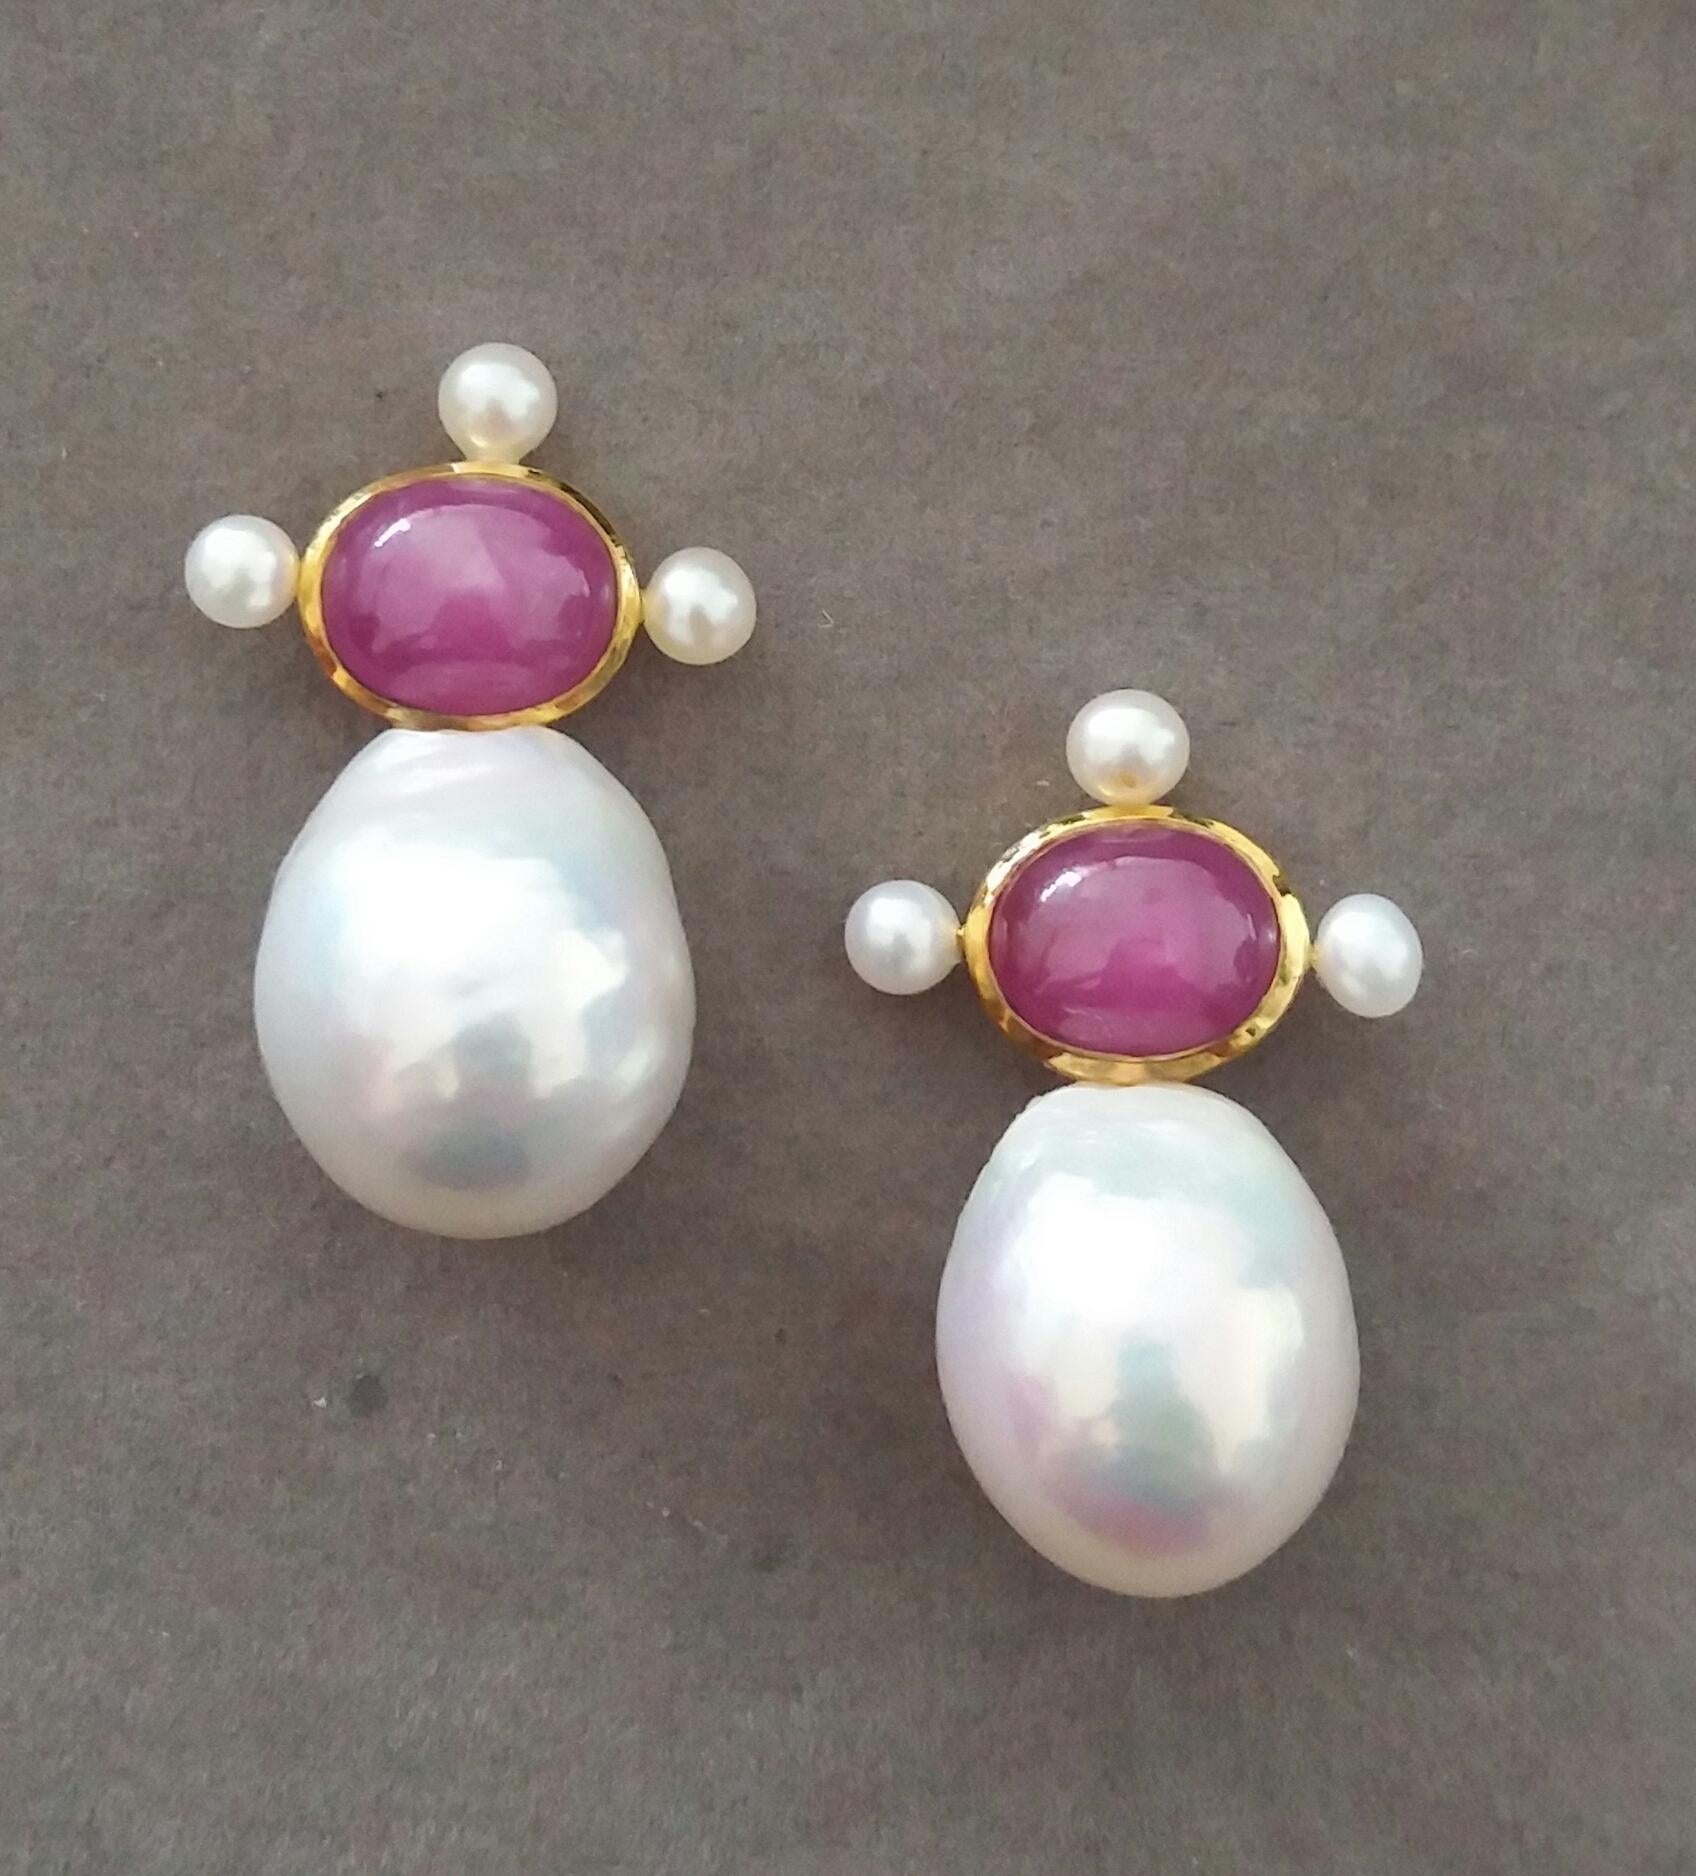 These elegant and handmade earrings have 2 Oval  Natural Ruby cabs measuring 8 x 10 mm set in a 14 Kt yellow gold bezel with 3 small round pearls of 3 mm on 3 sides at the top to which are suspended 2 very good luster White Pear Shape Baroque Pearls